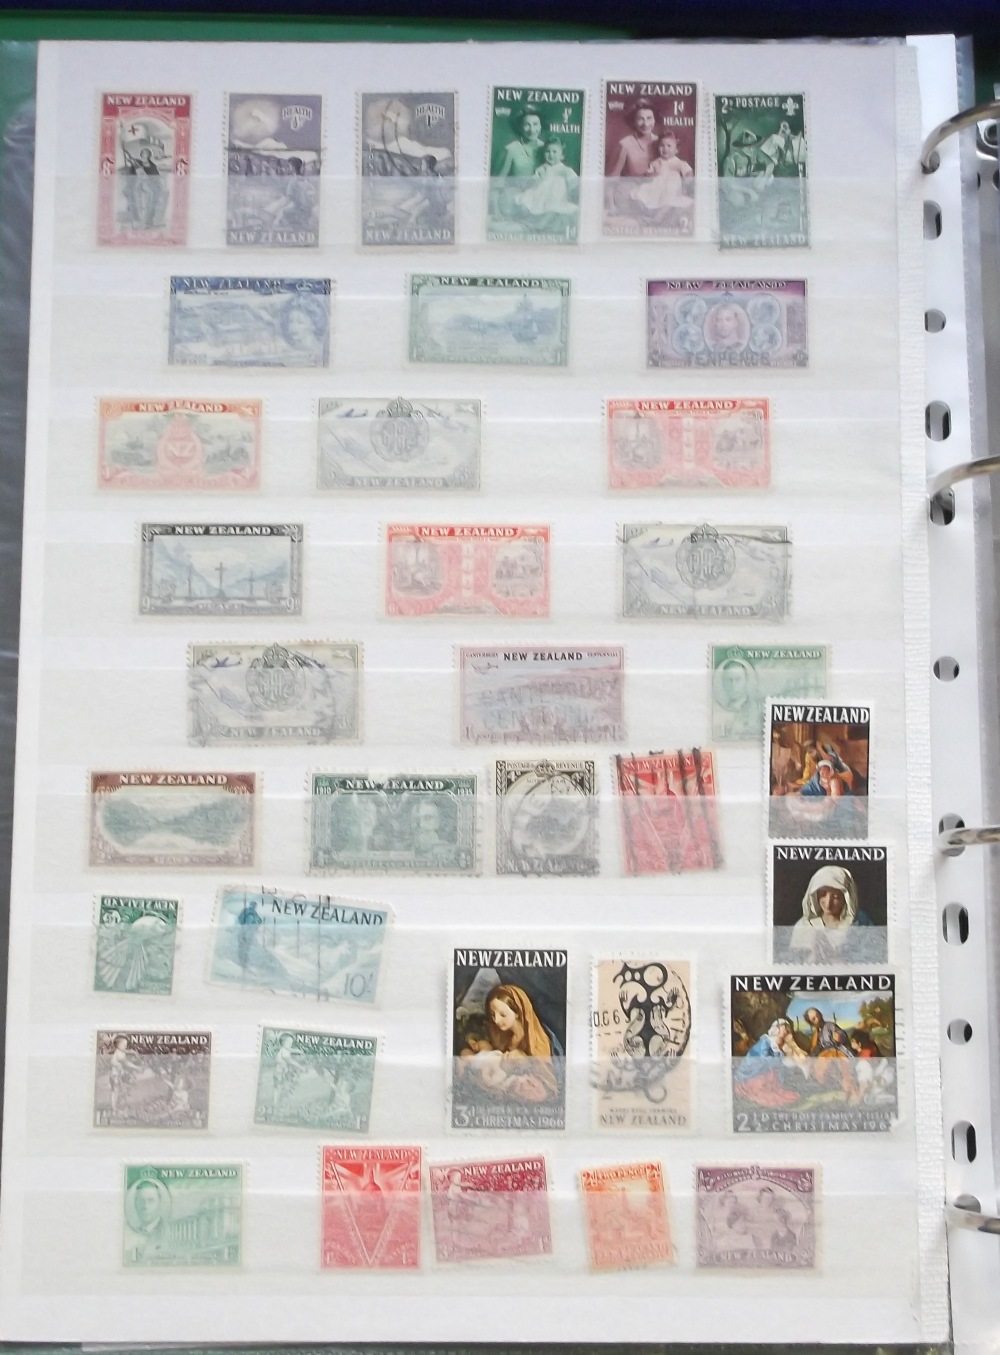 Stamps, New Zealand, a collection of mint and used stamps in folder, mostly on stock album pages, - Image 2 of 3